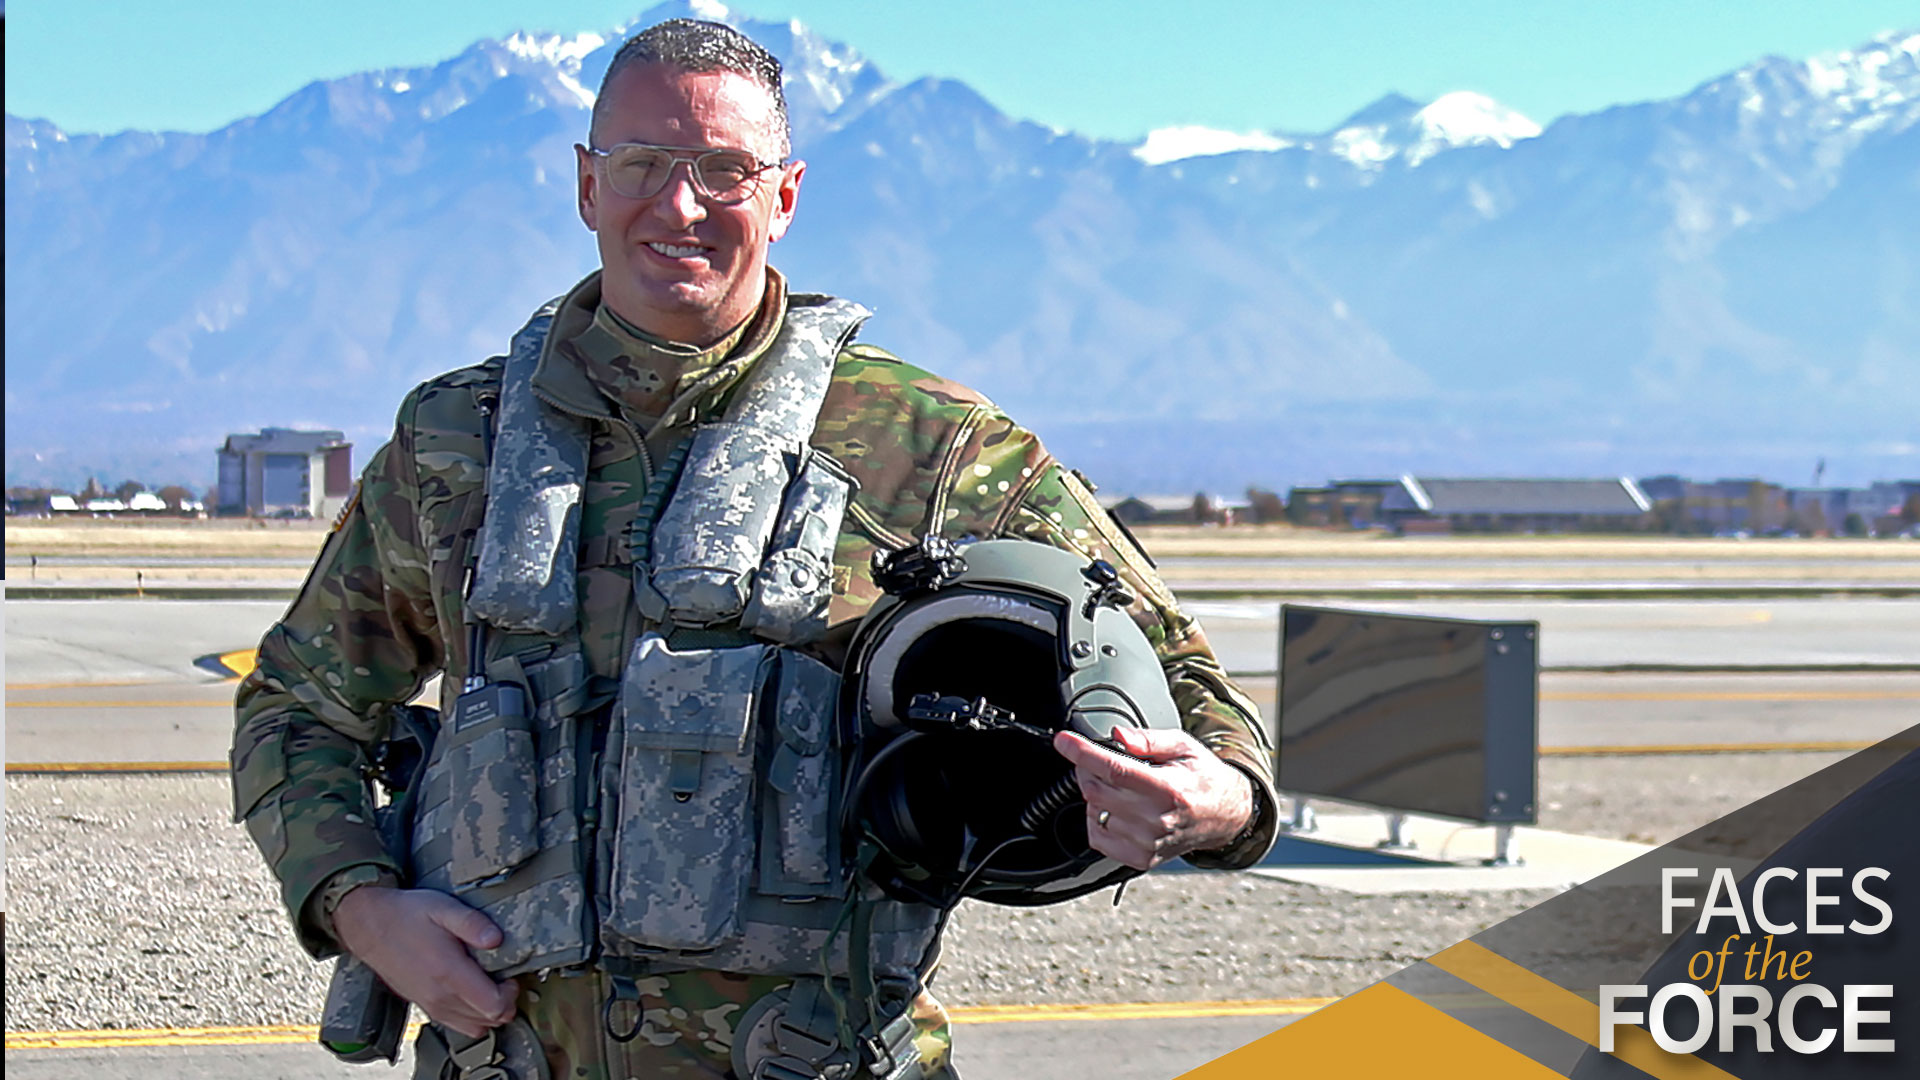 FACES OF THE FORCE: COL. STEVEN R. BRADDOM